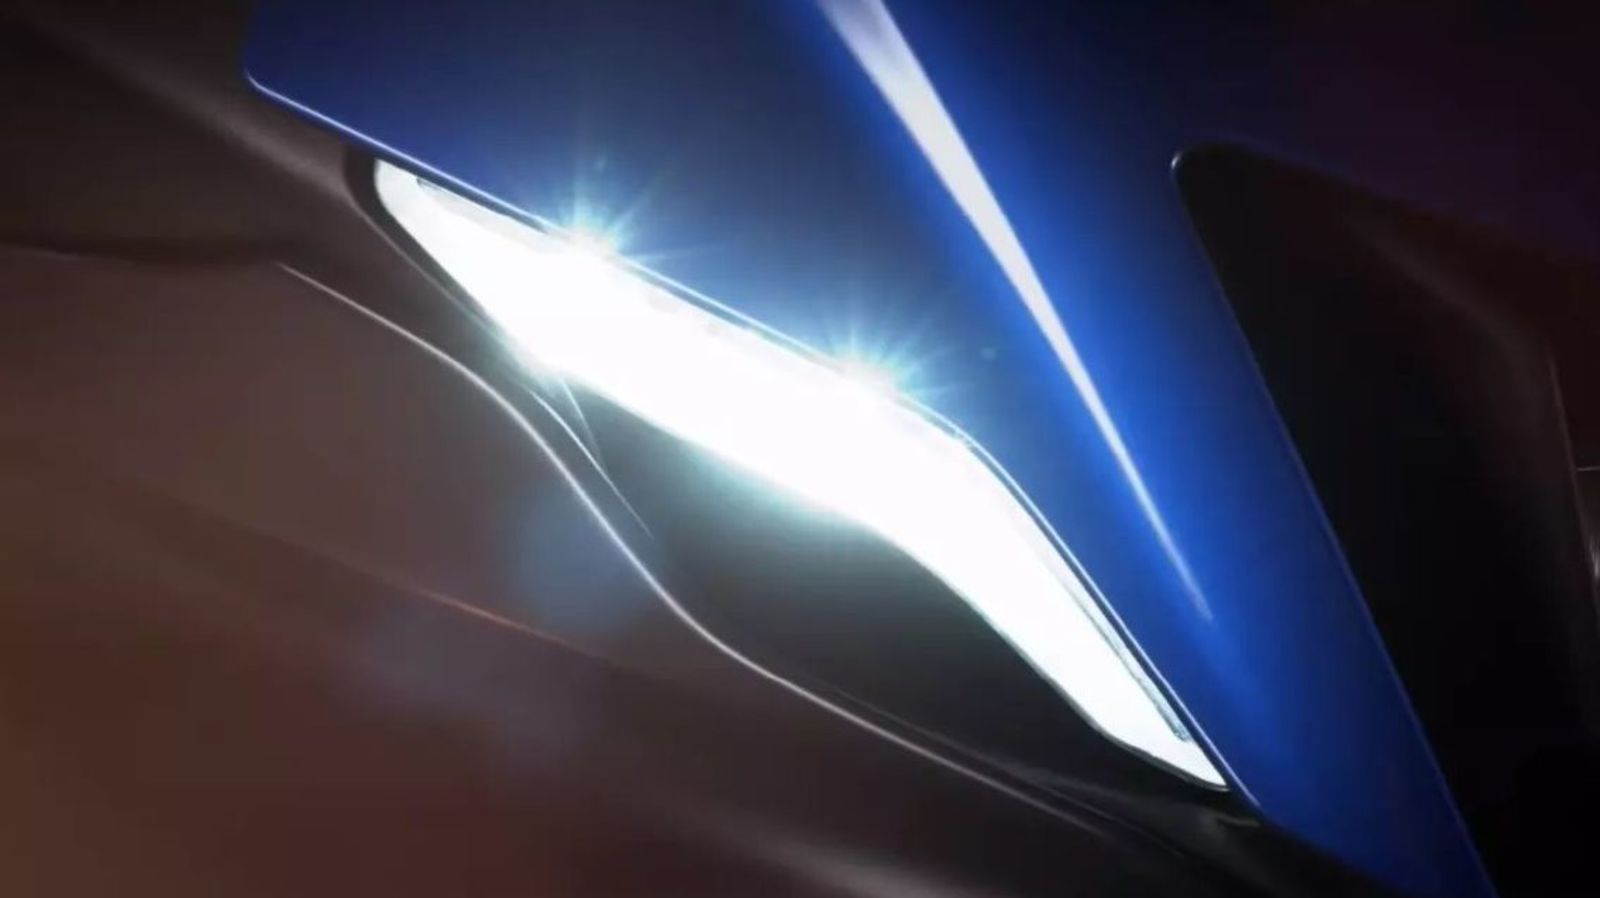 Yamaha YZF-R7 supersport's headlight teased ahead of May 18 debut